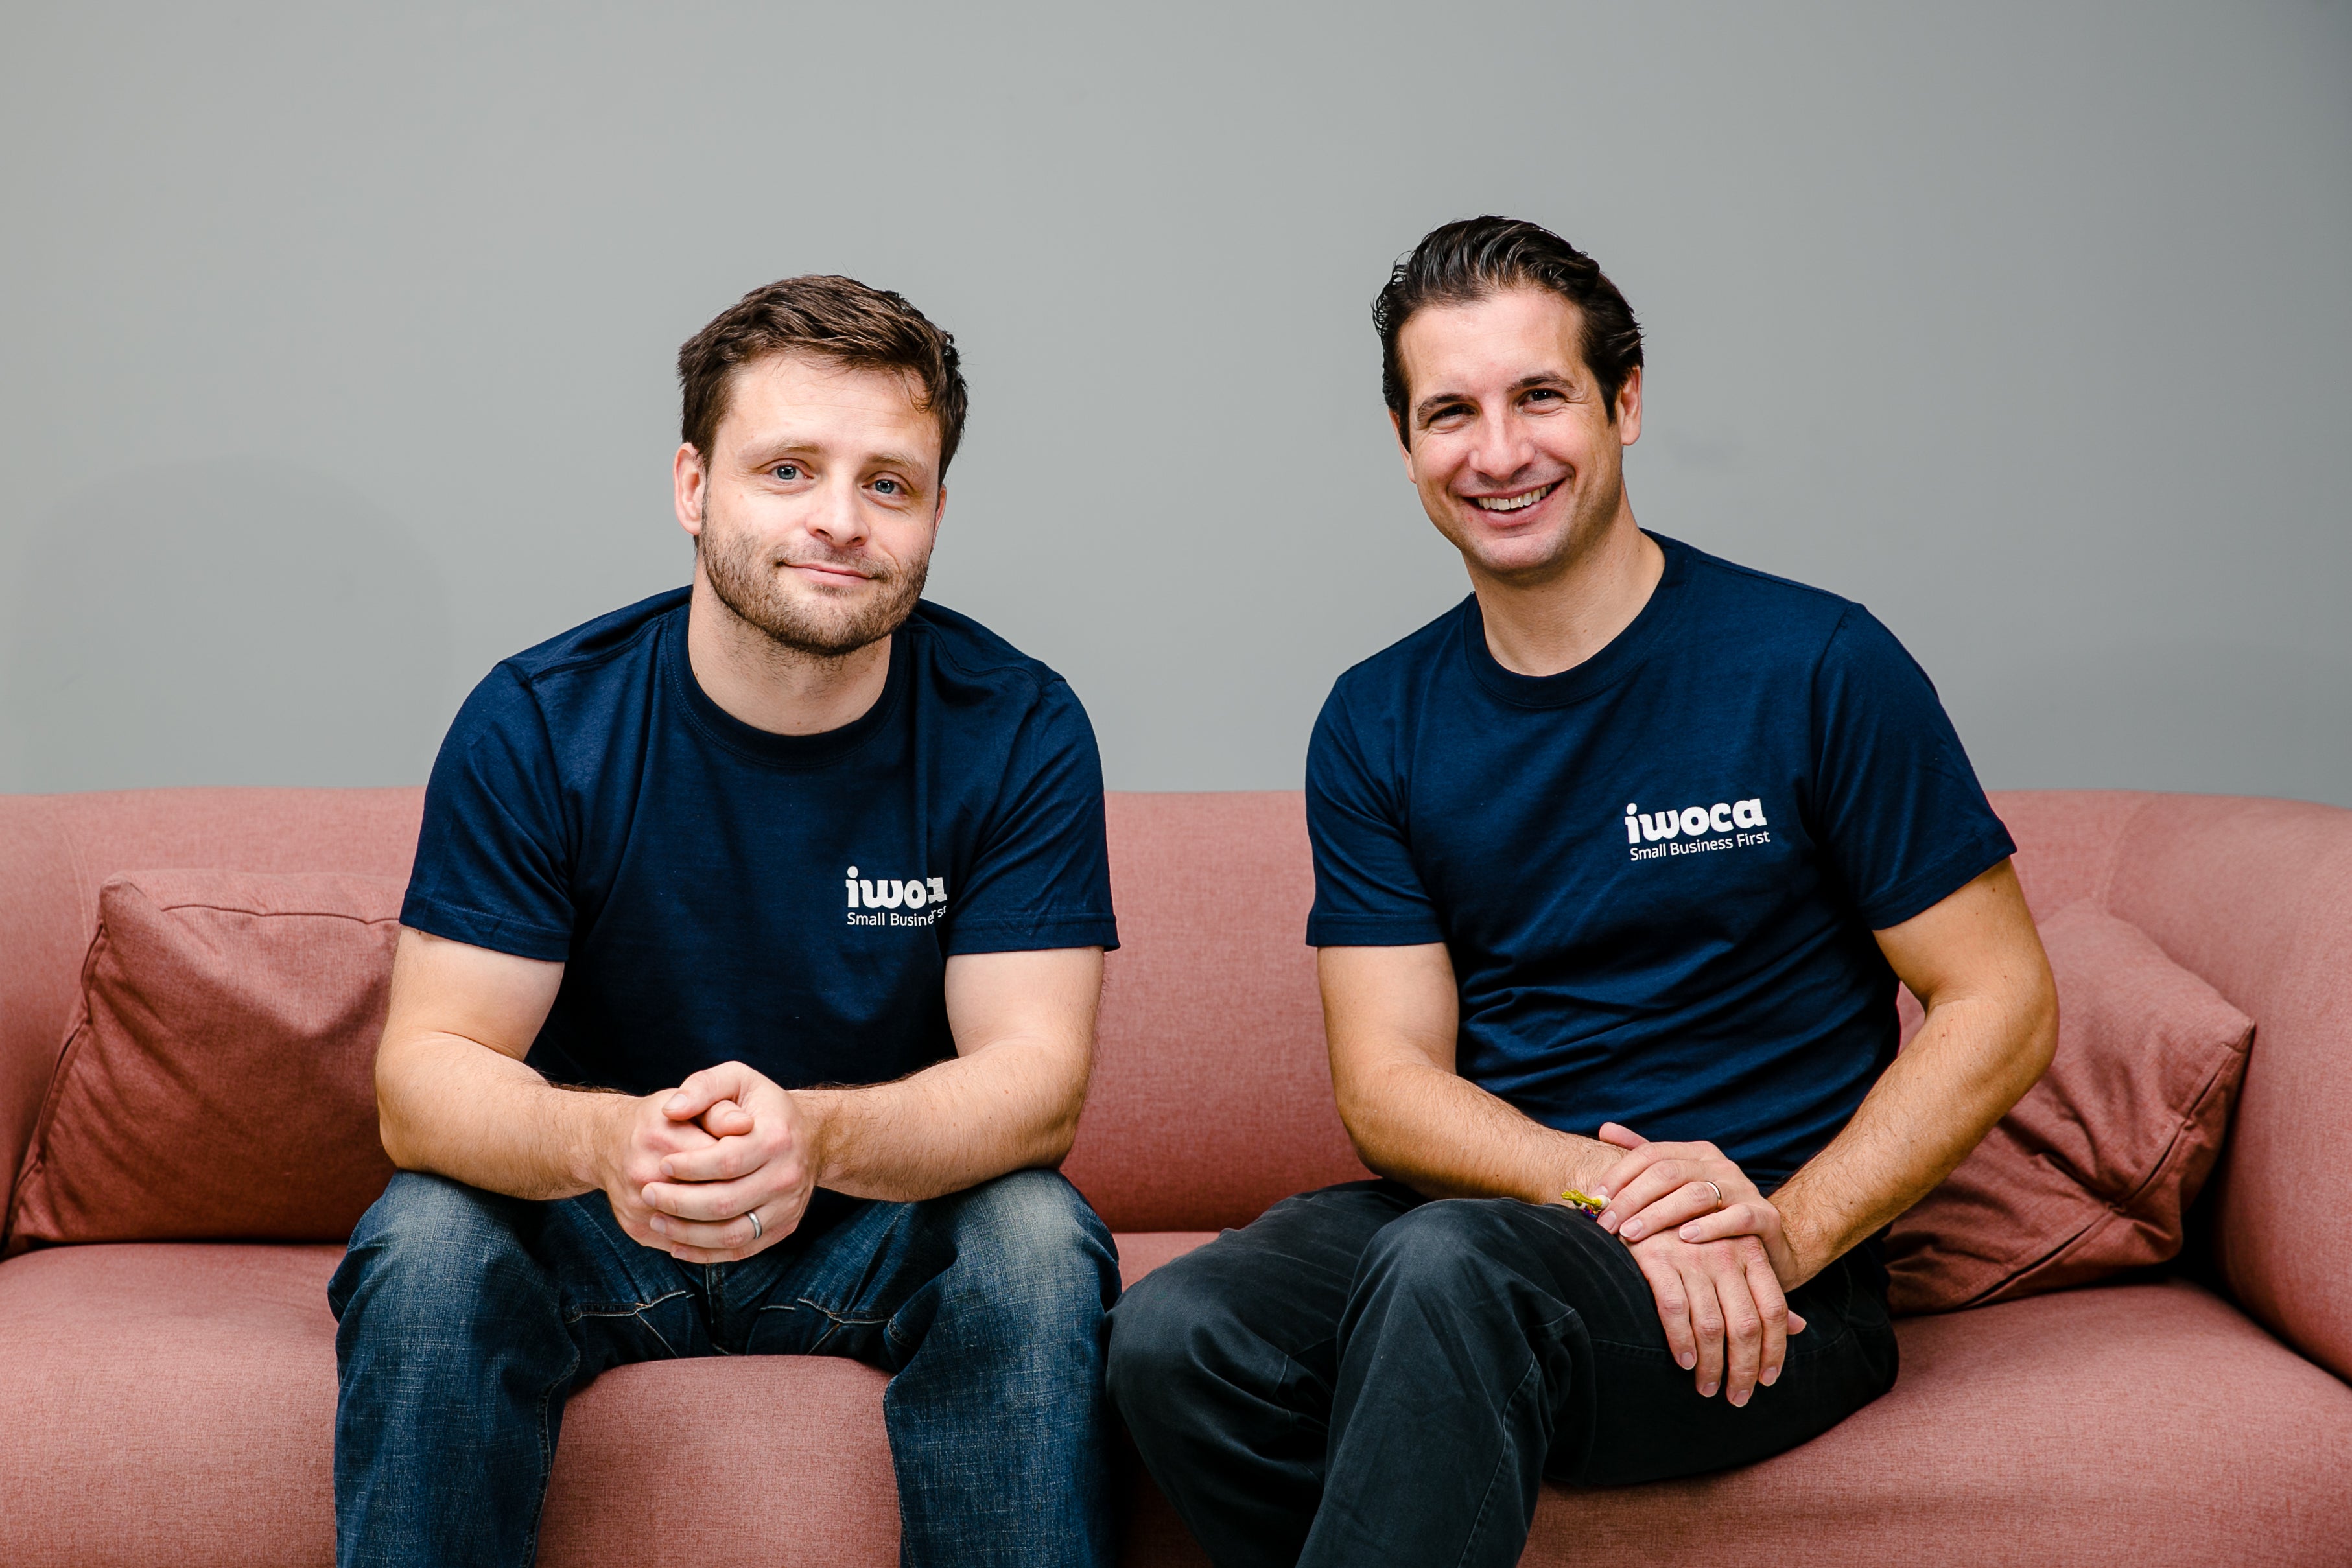 The co-founders of iwoca: James Dear (left) and Christoph Rieche